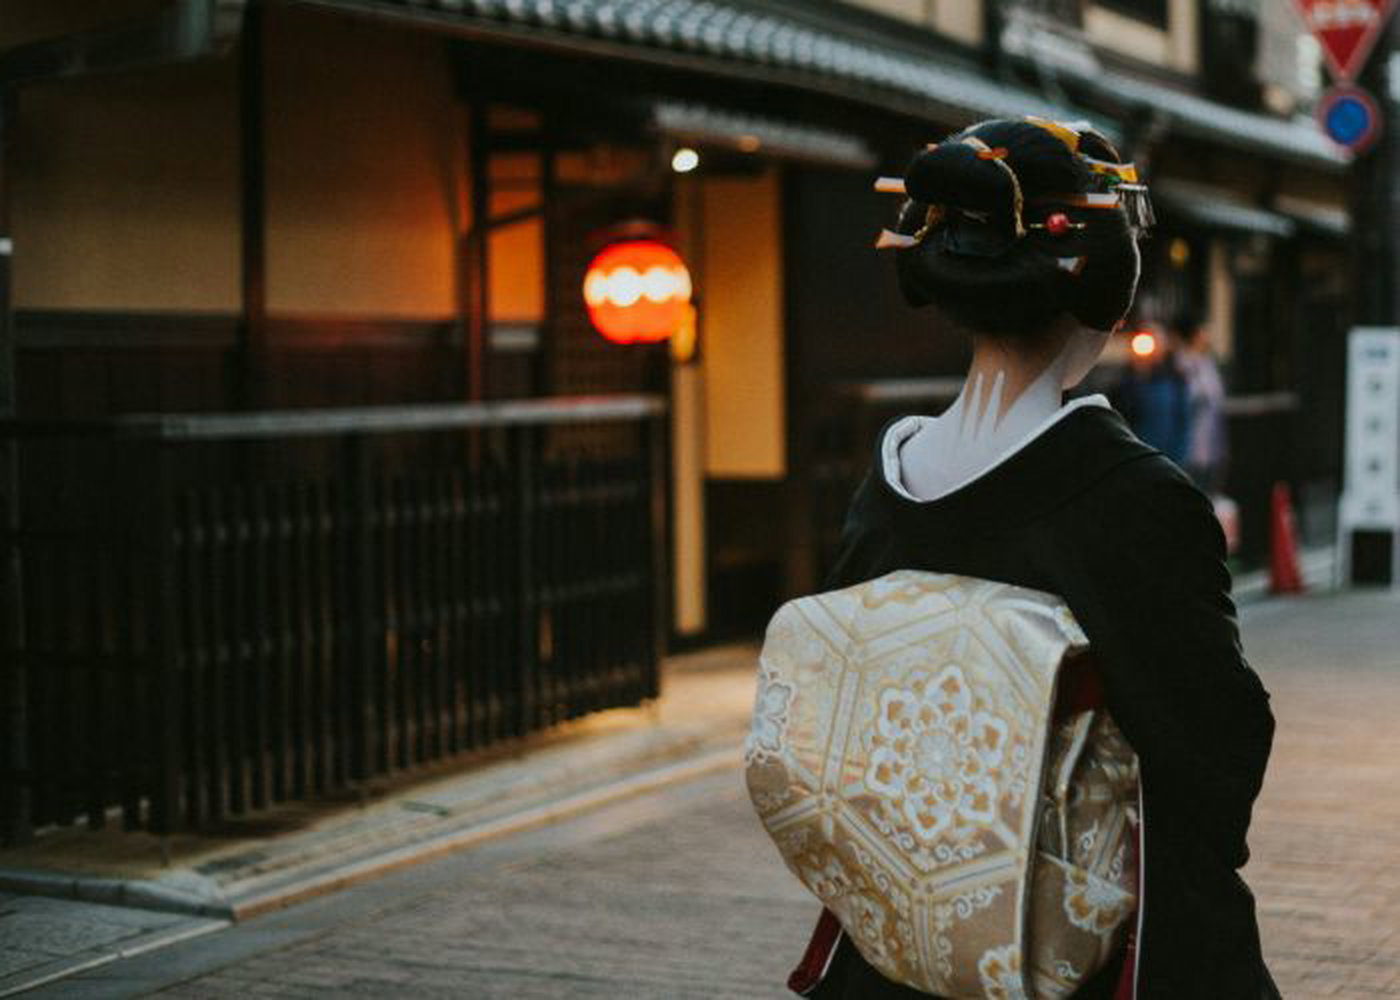 A geisha walks through the streets of Gion. Her hair is up, neck painted, and her golden obi is tied behind her.